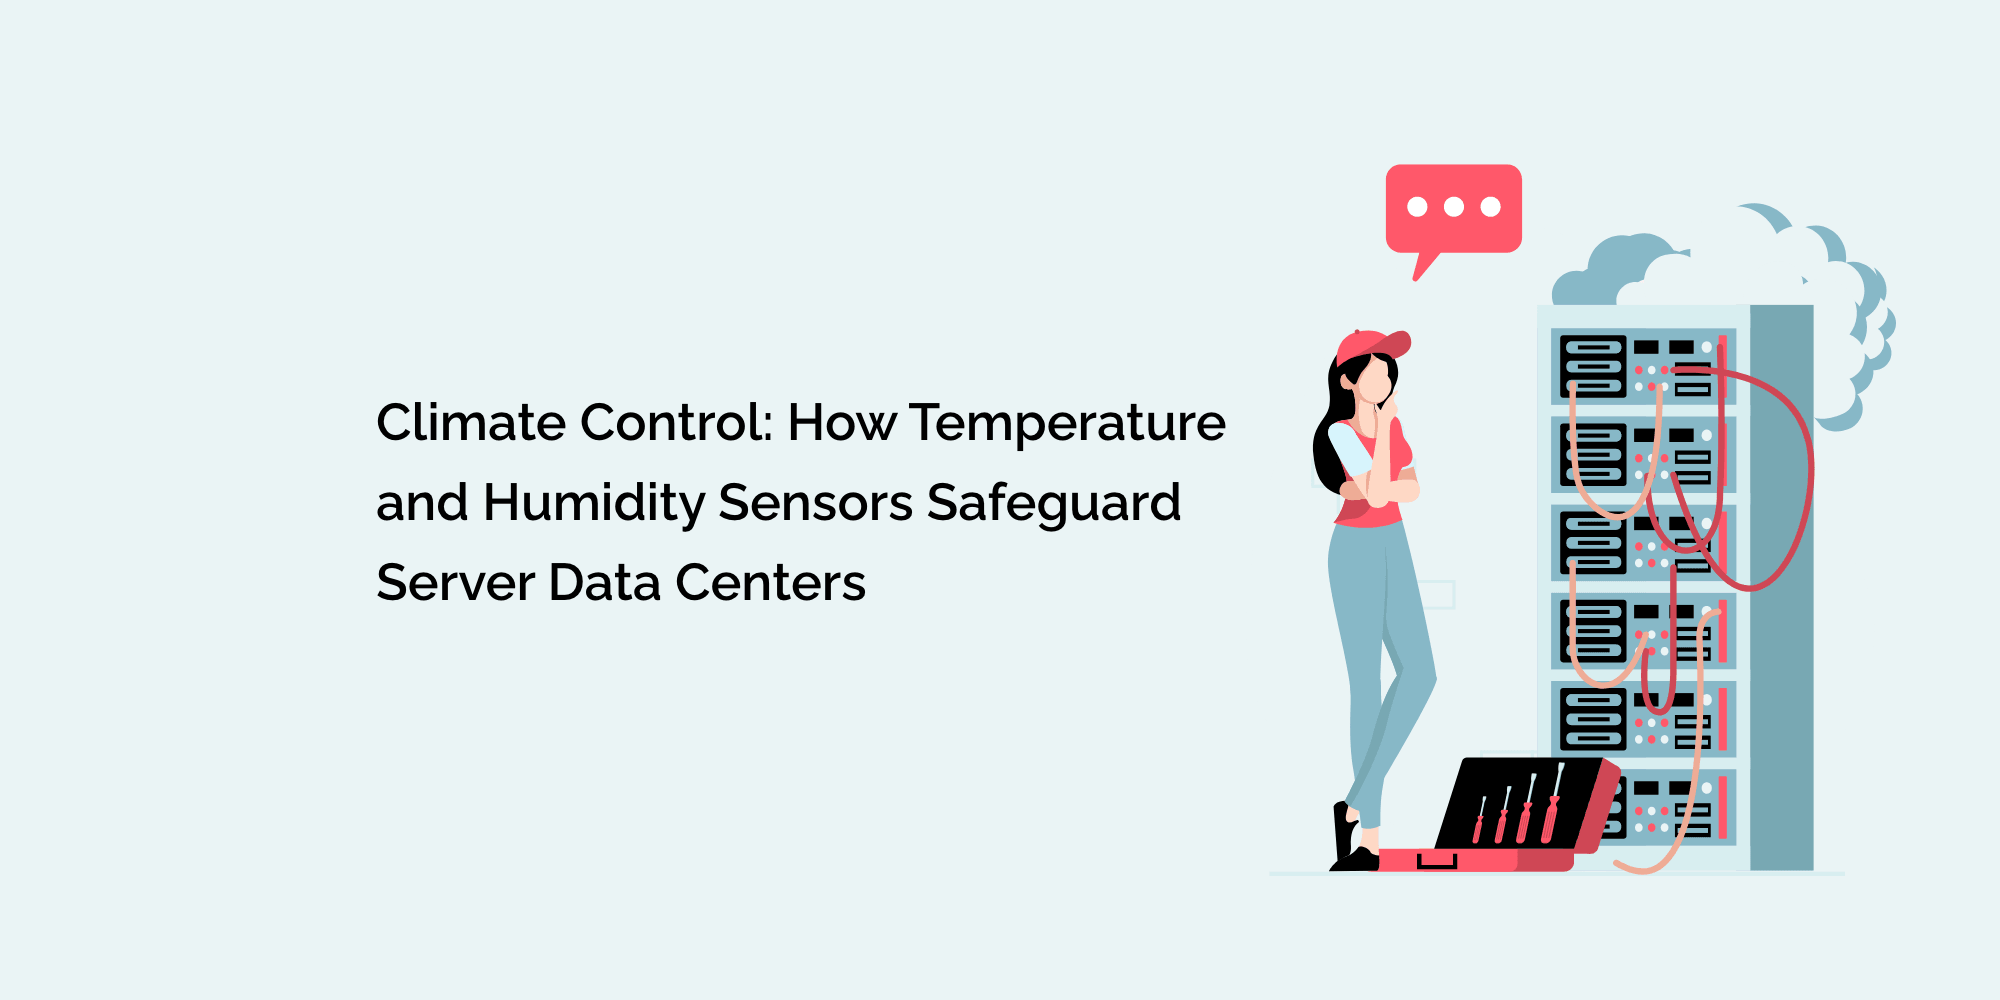 Climate Control: How Temperature and Humidity Sensors Safeguard Server Data Centers